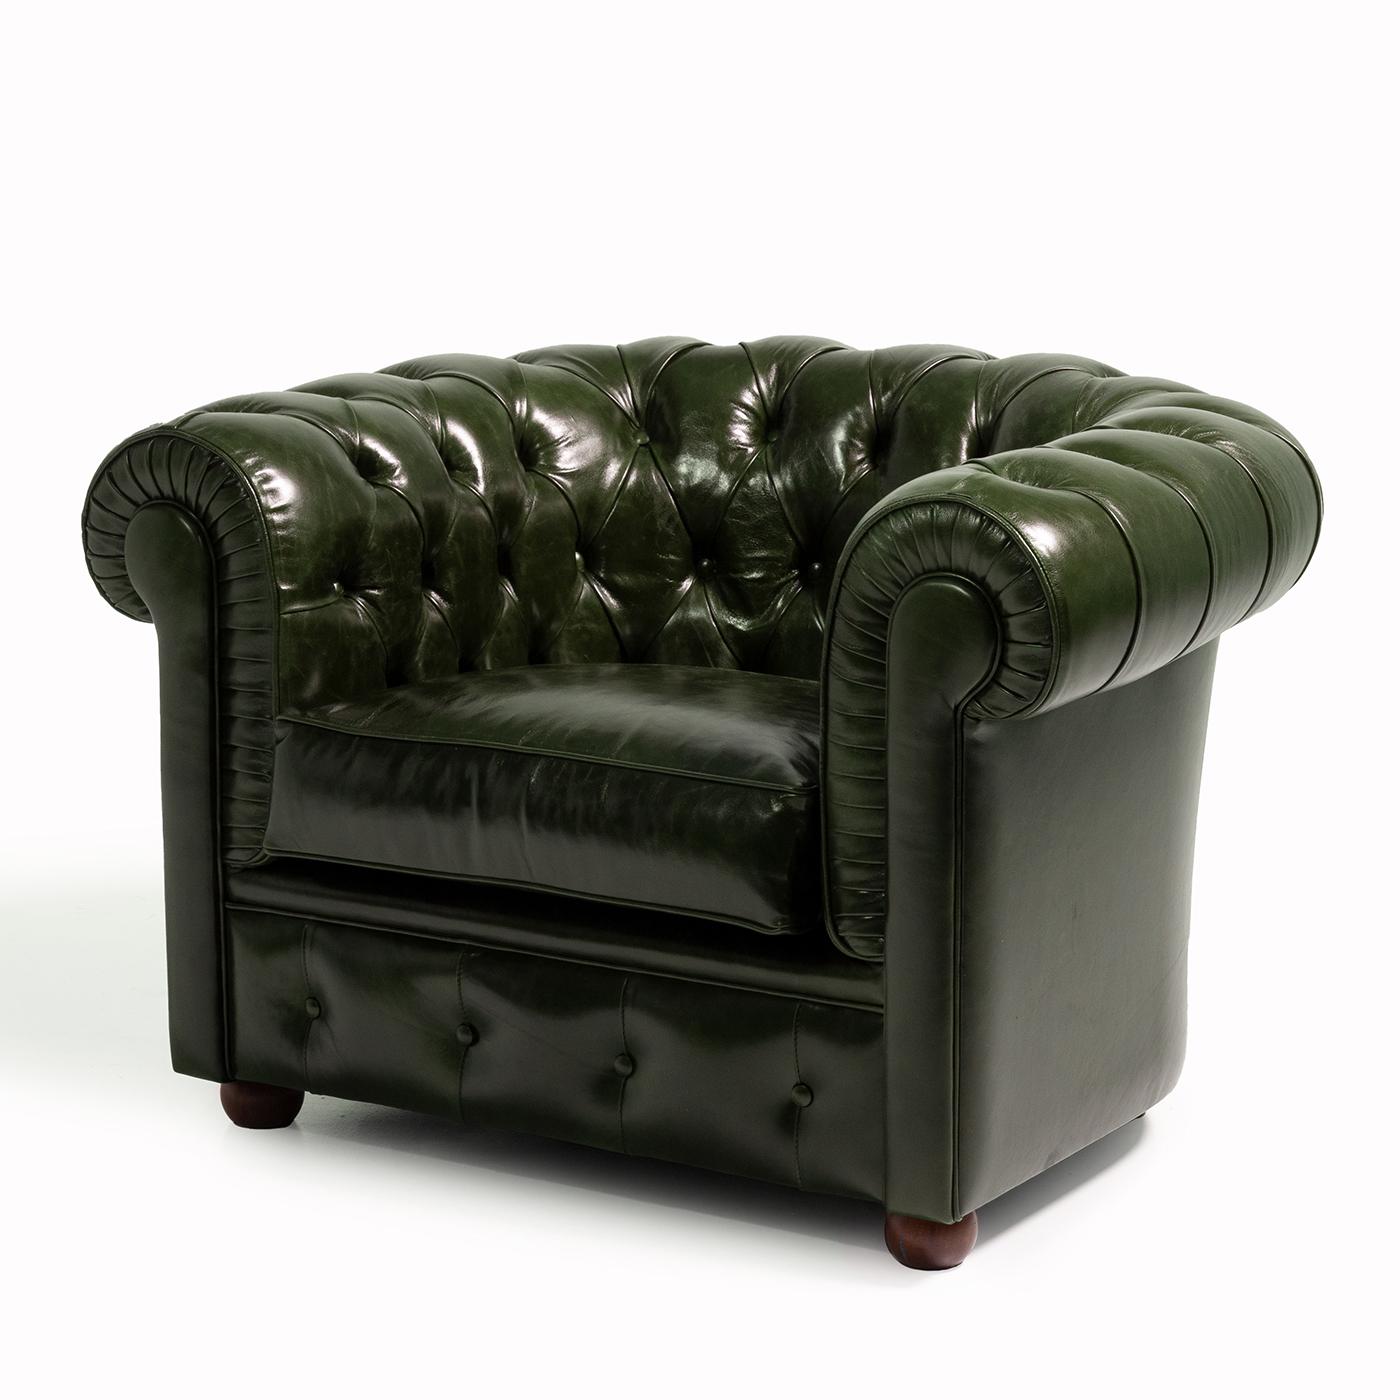 The Chesterfield armchair, from Tribeca Collection, is an icon of the world of the leather lounge, a timeless classic in the world of upholstery, an item that enriches any home and moves anyone who looks at it. For the realization of the